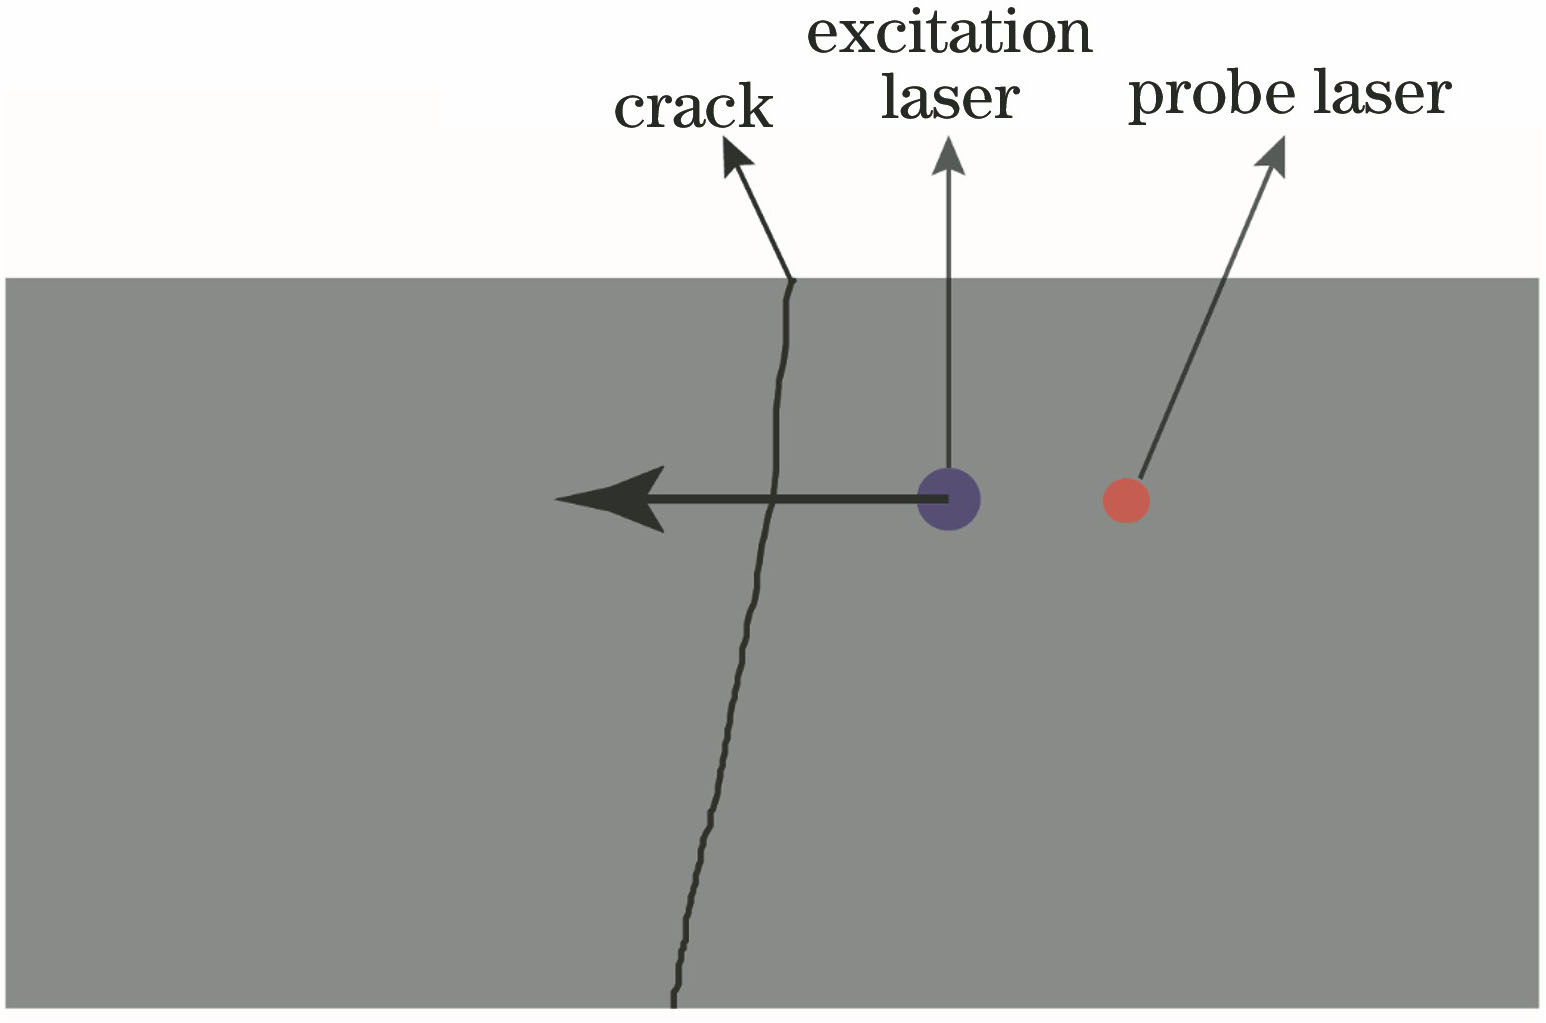 Schematic of position of excitation laser, probe laser and crack on surface of sample